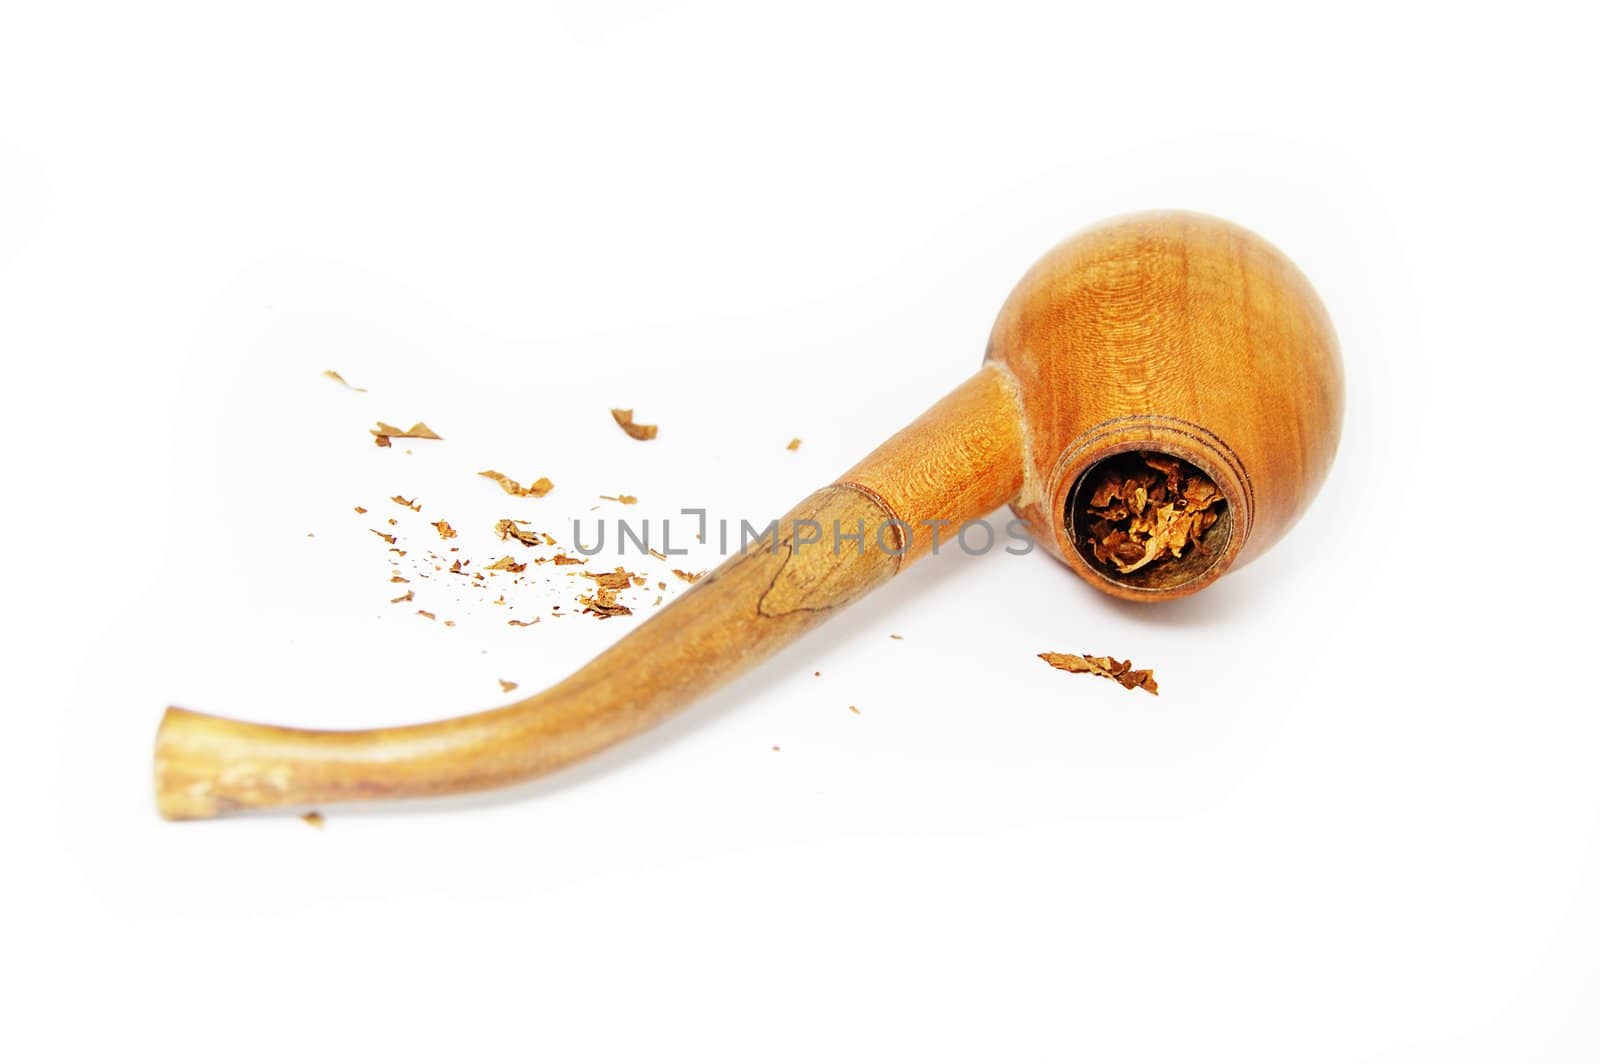 Tobacco pipe by Angel_a